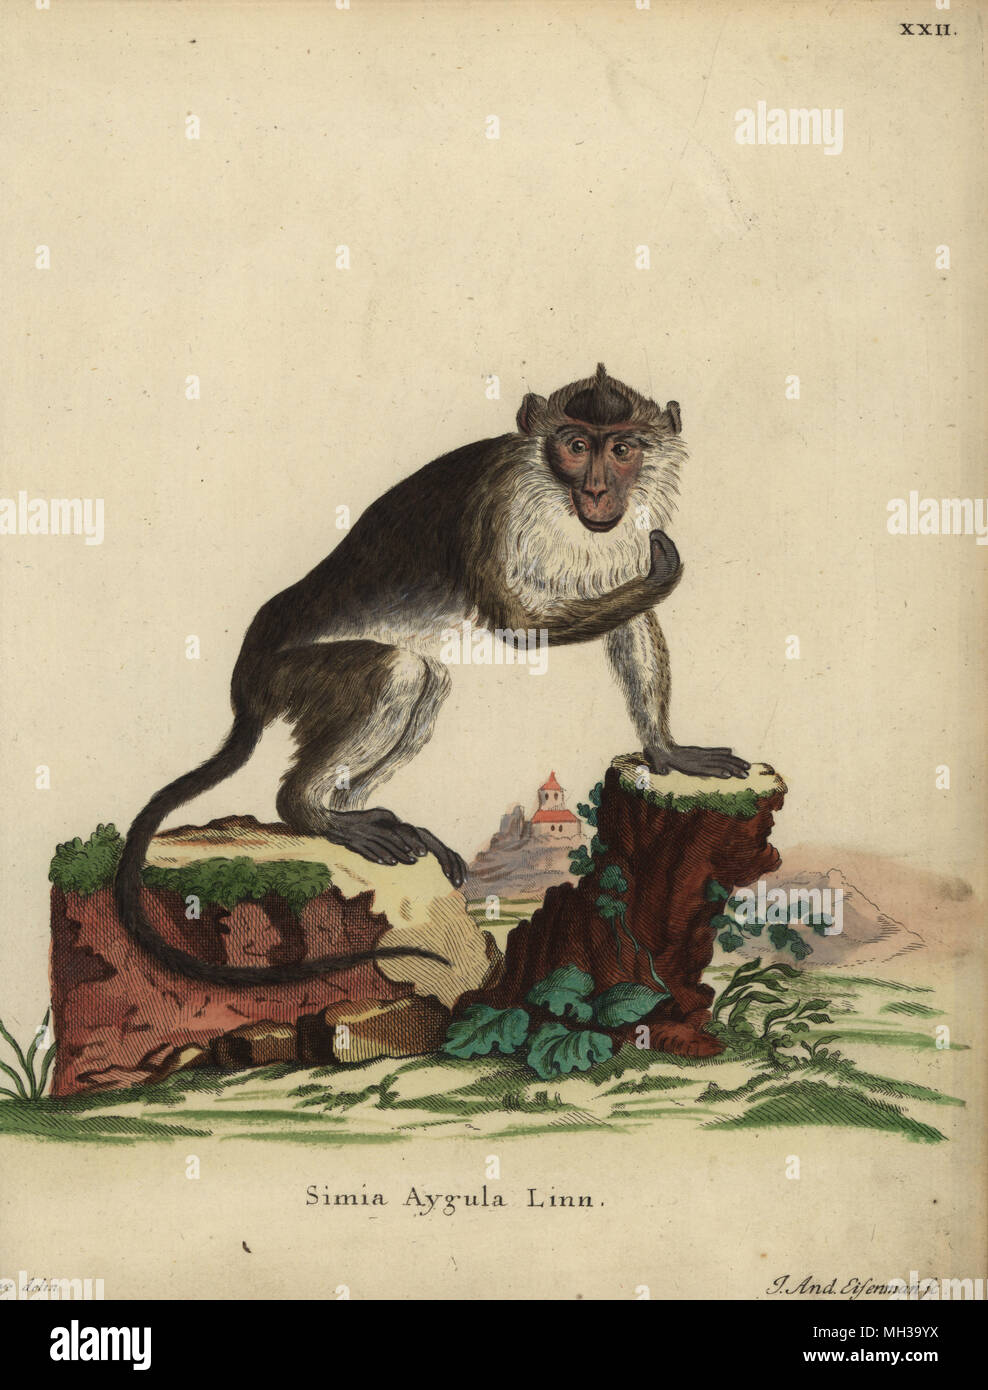 Crab-eating macaque, Macaca fascicularis. Simia aygula Linn. Handcoloured copperplate engraving by Jakob Andreas Eisenmann after an illustration by Jacques de Seve from Johann Christian Daniel Schreber's Animal Illustrations after Nature, or Schreber's Fantastic Animals, Erlangen, Germany, 1775. Stock Photo